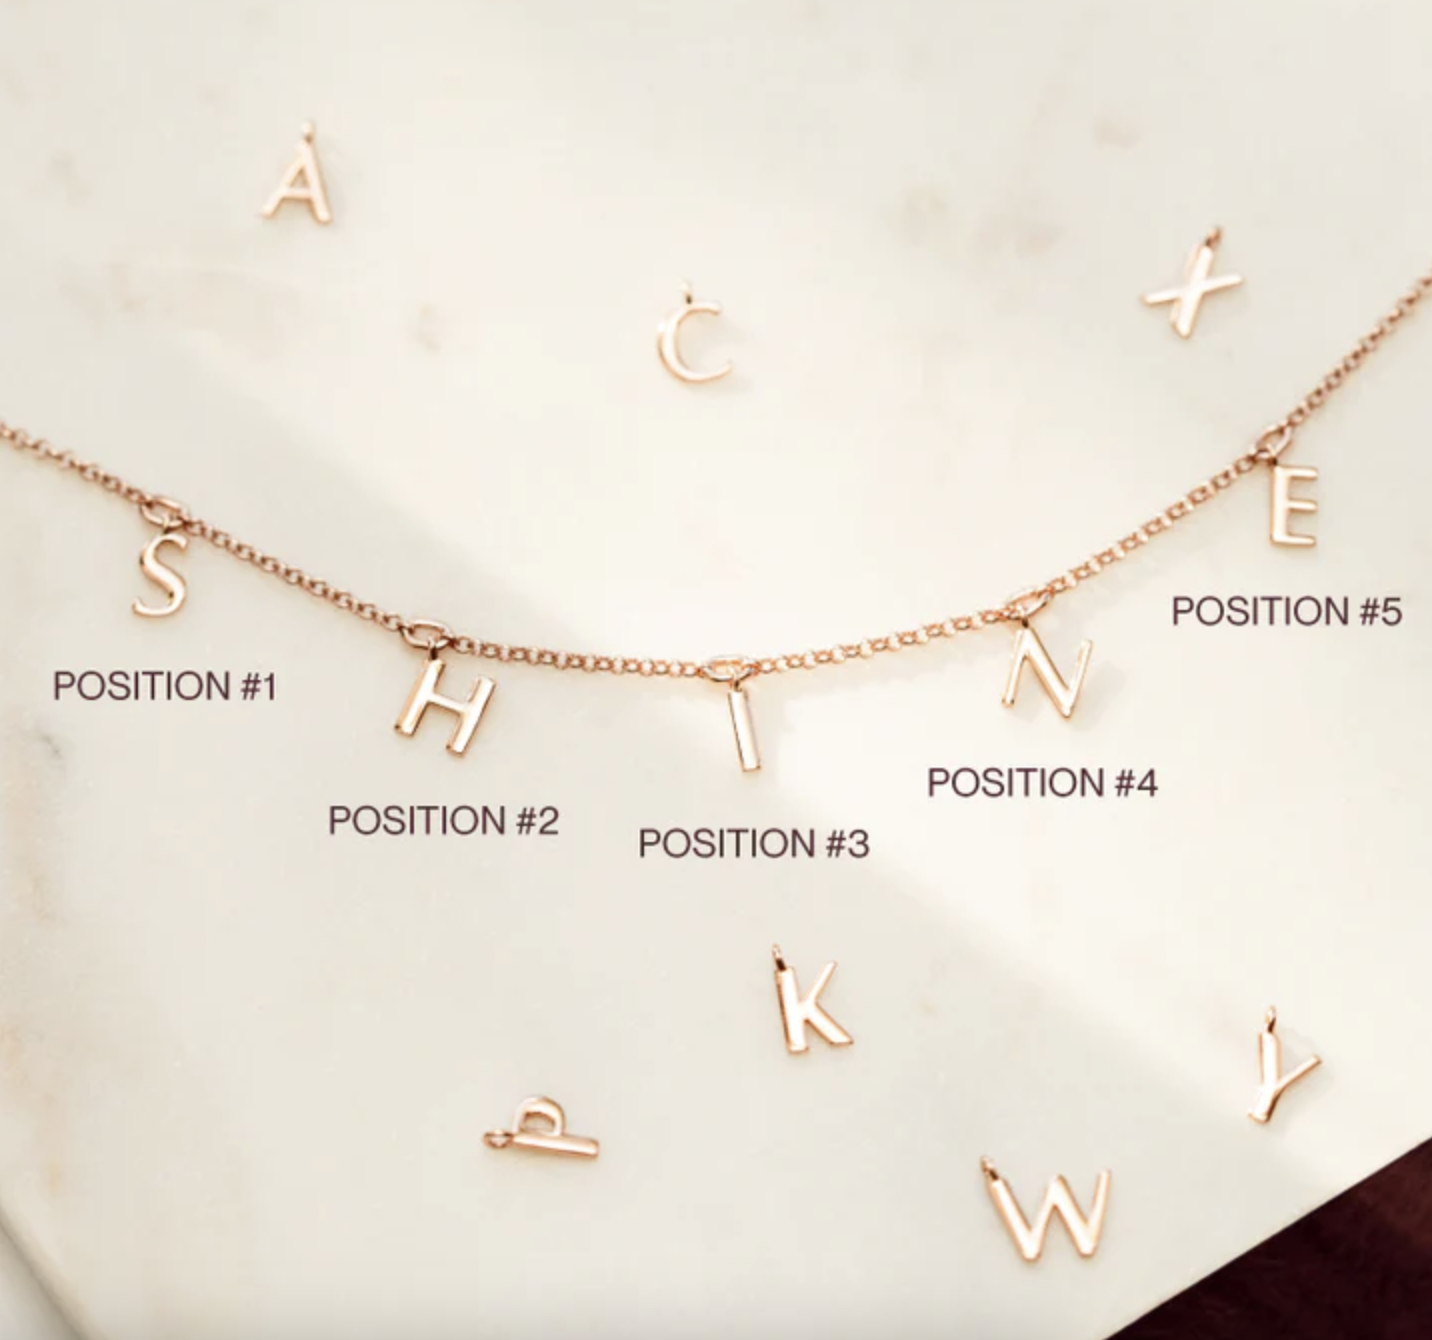 a necklace with letters that spell shine